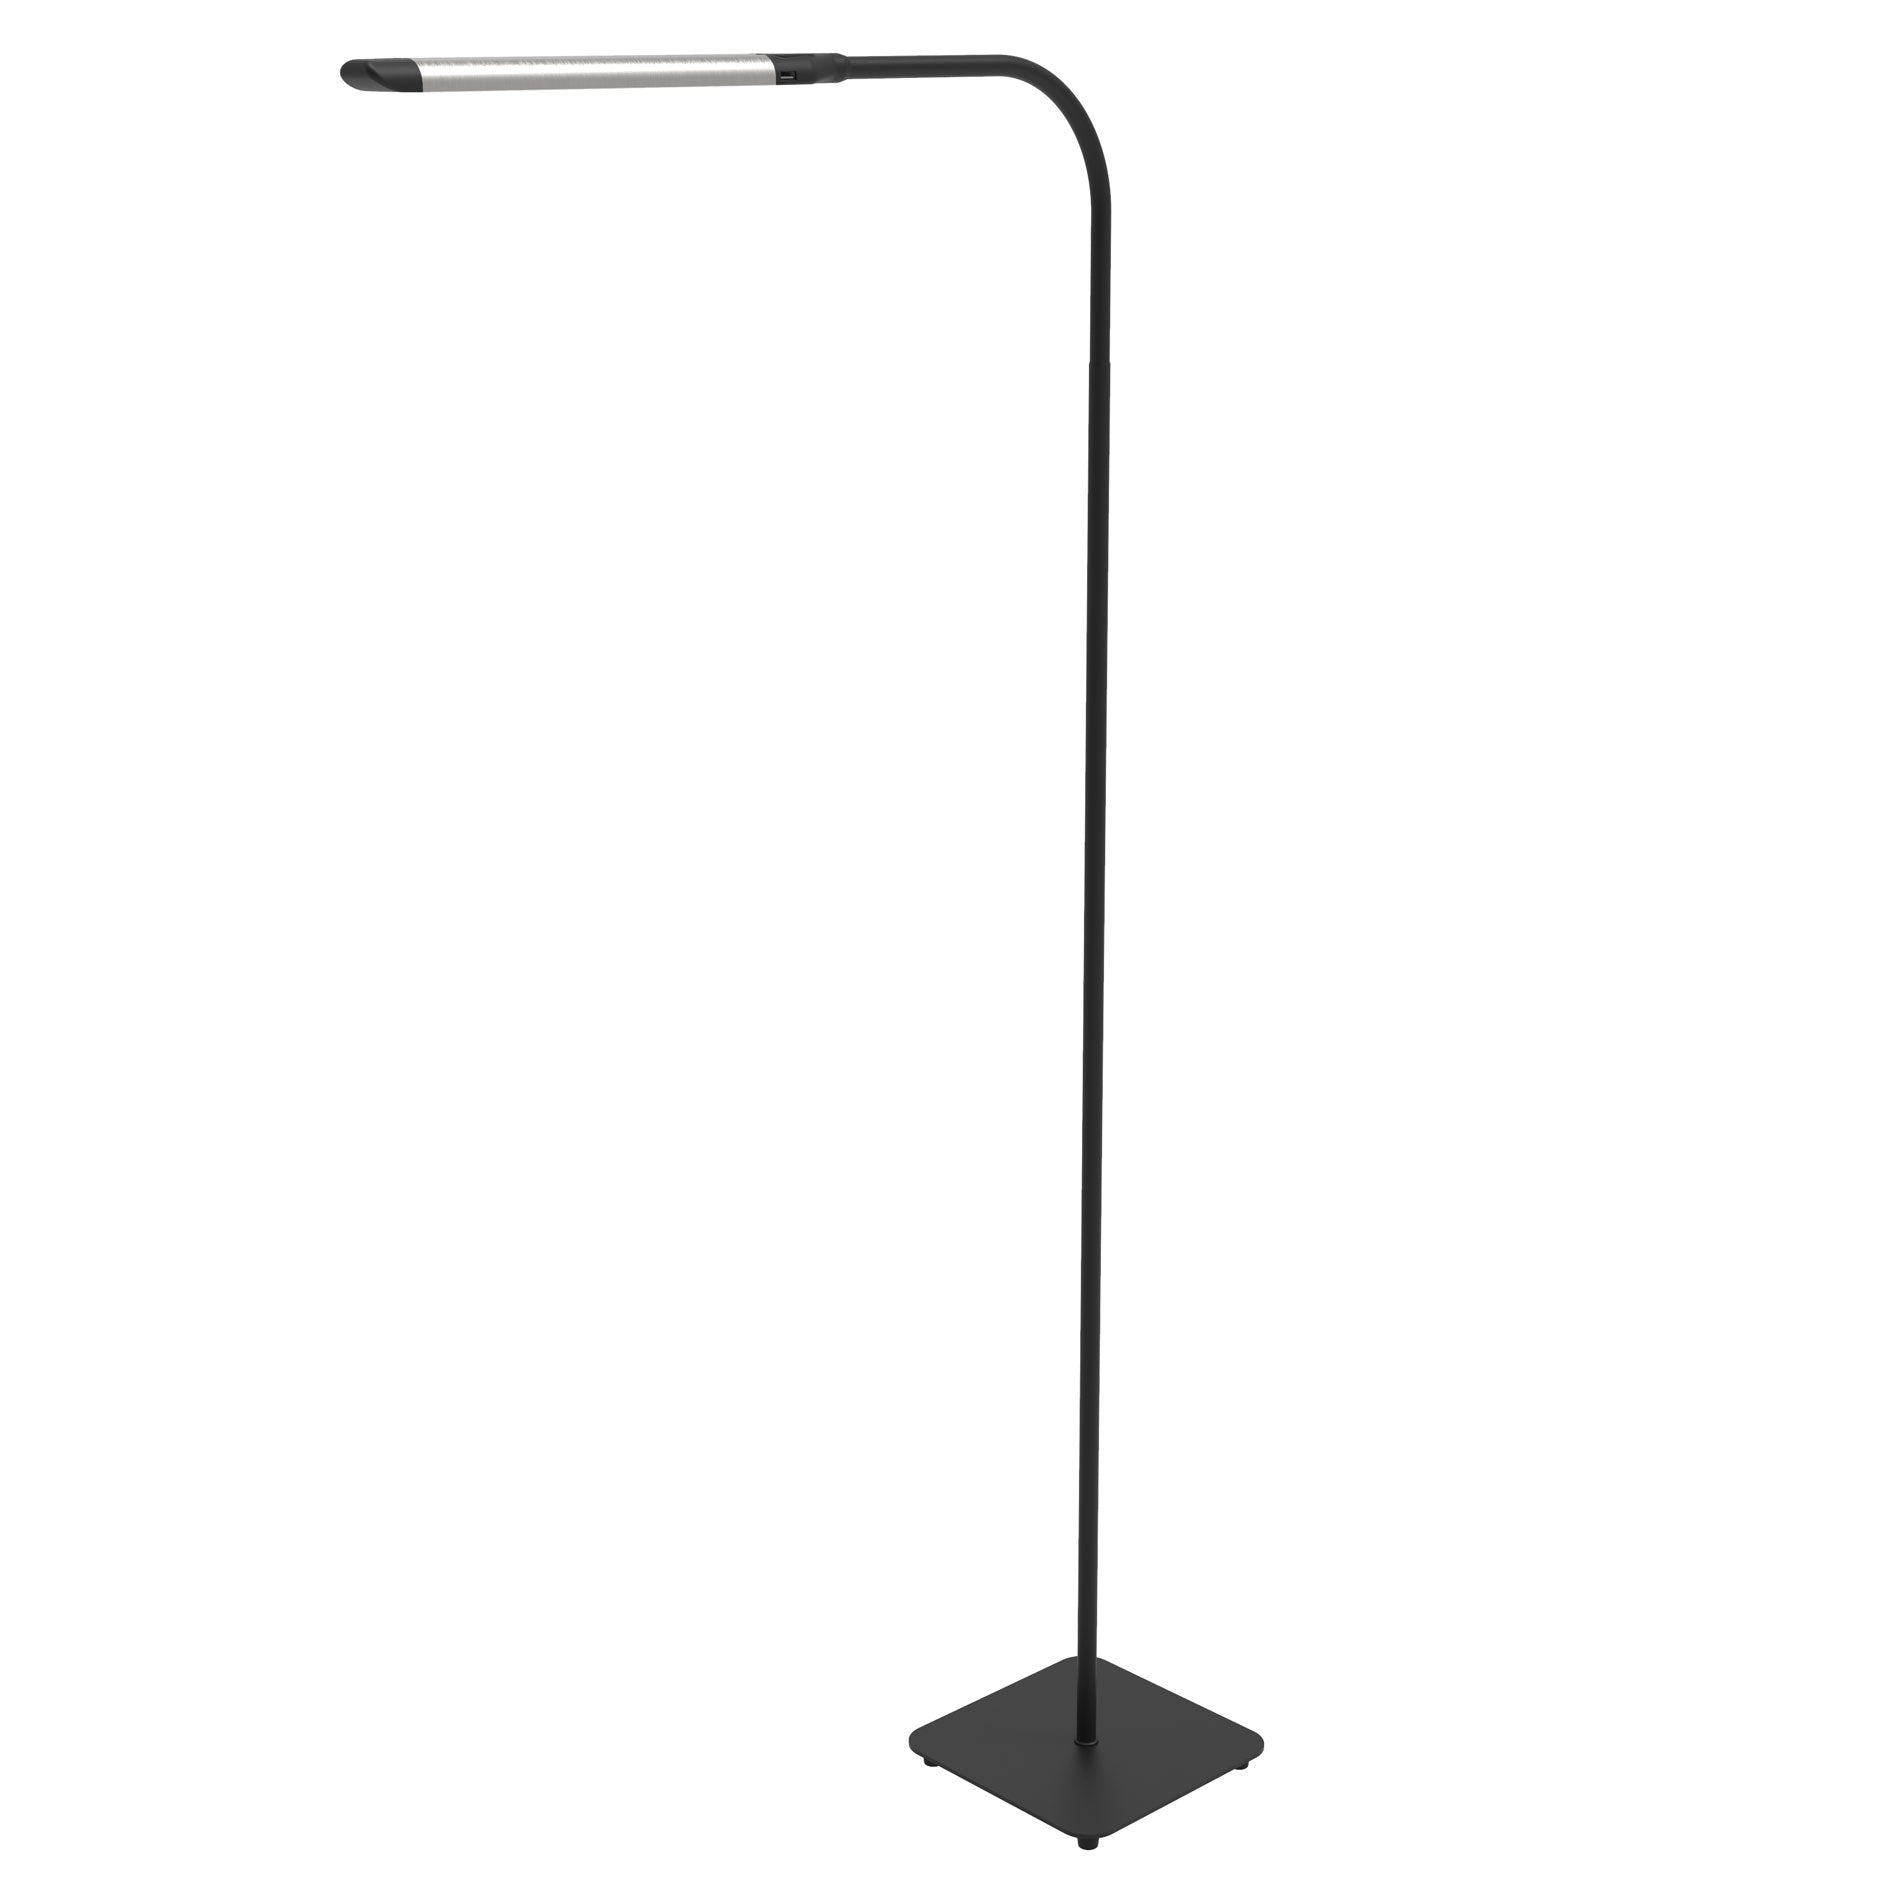  Modern LED Floor Lamp with USB Charger Socket & Wireless Remote